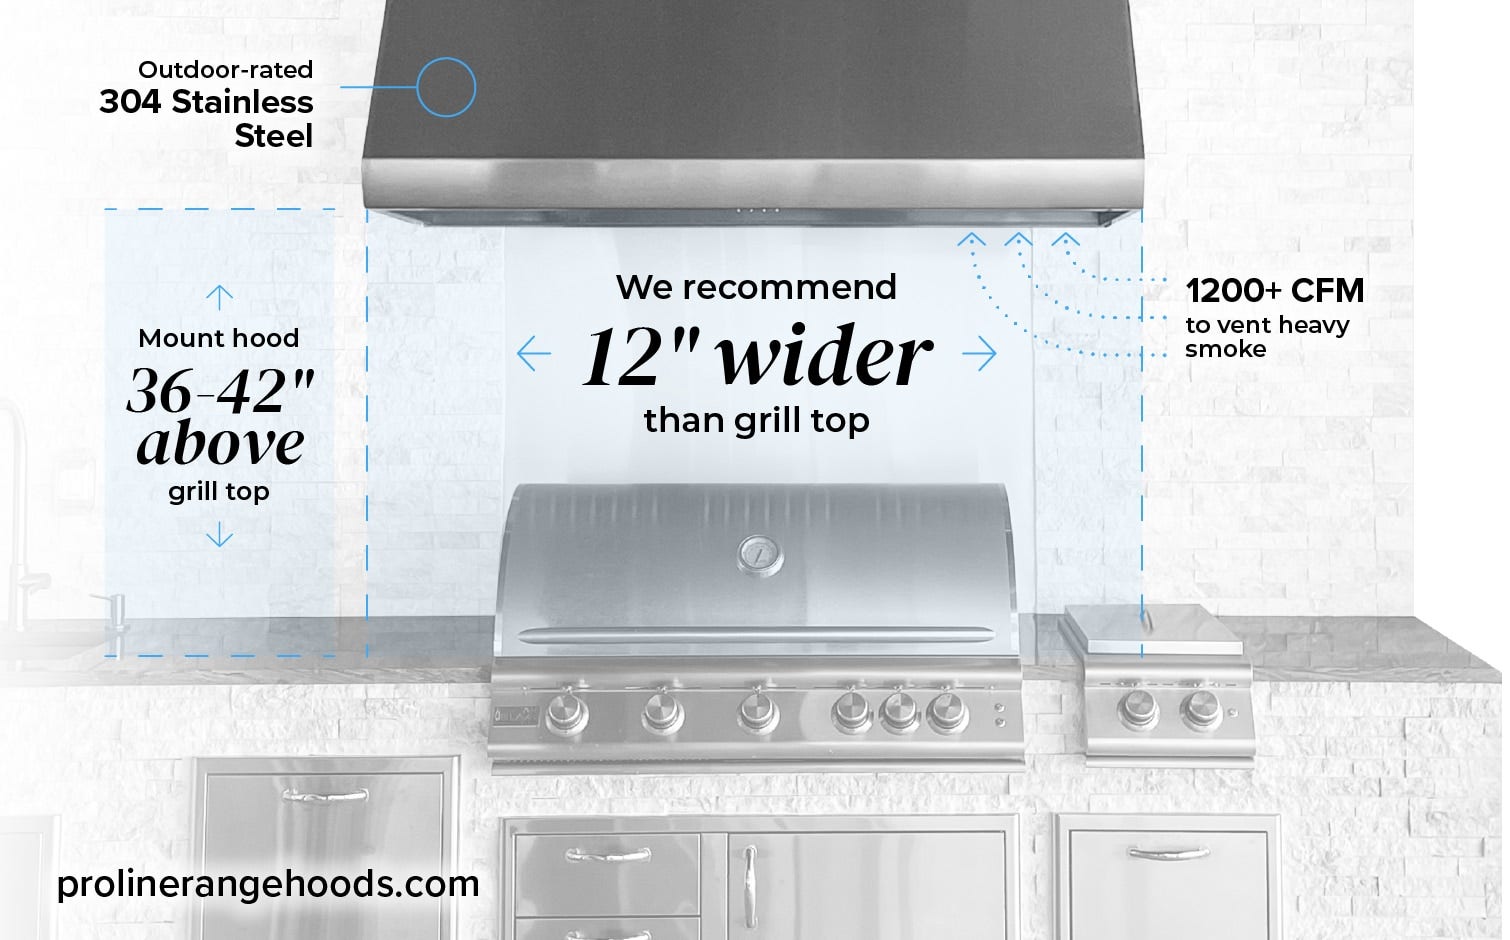 Things to Consider When Mounting Range Hood Over Pellet or Charcoal Grill